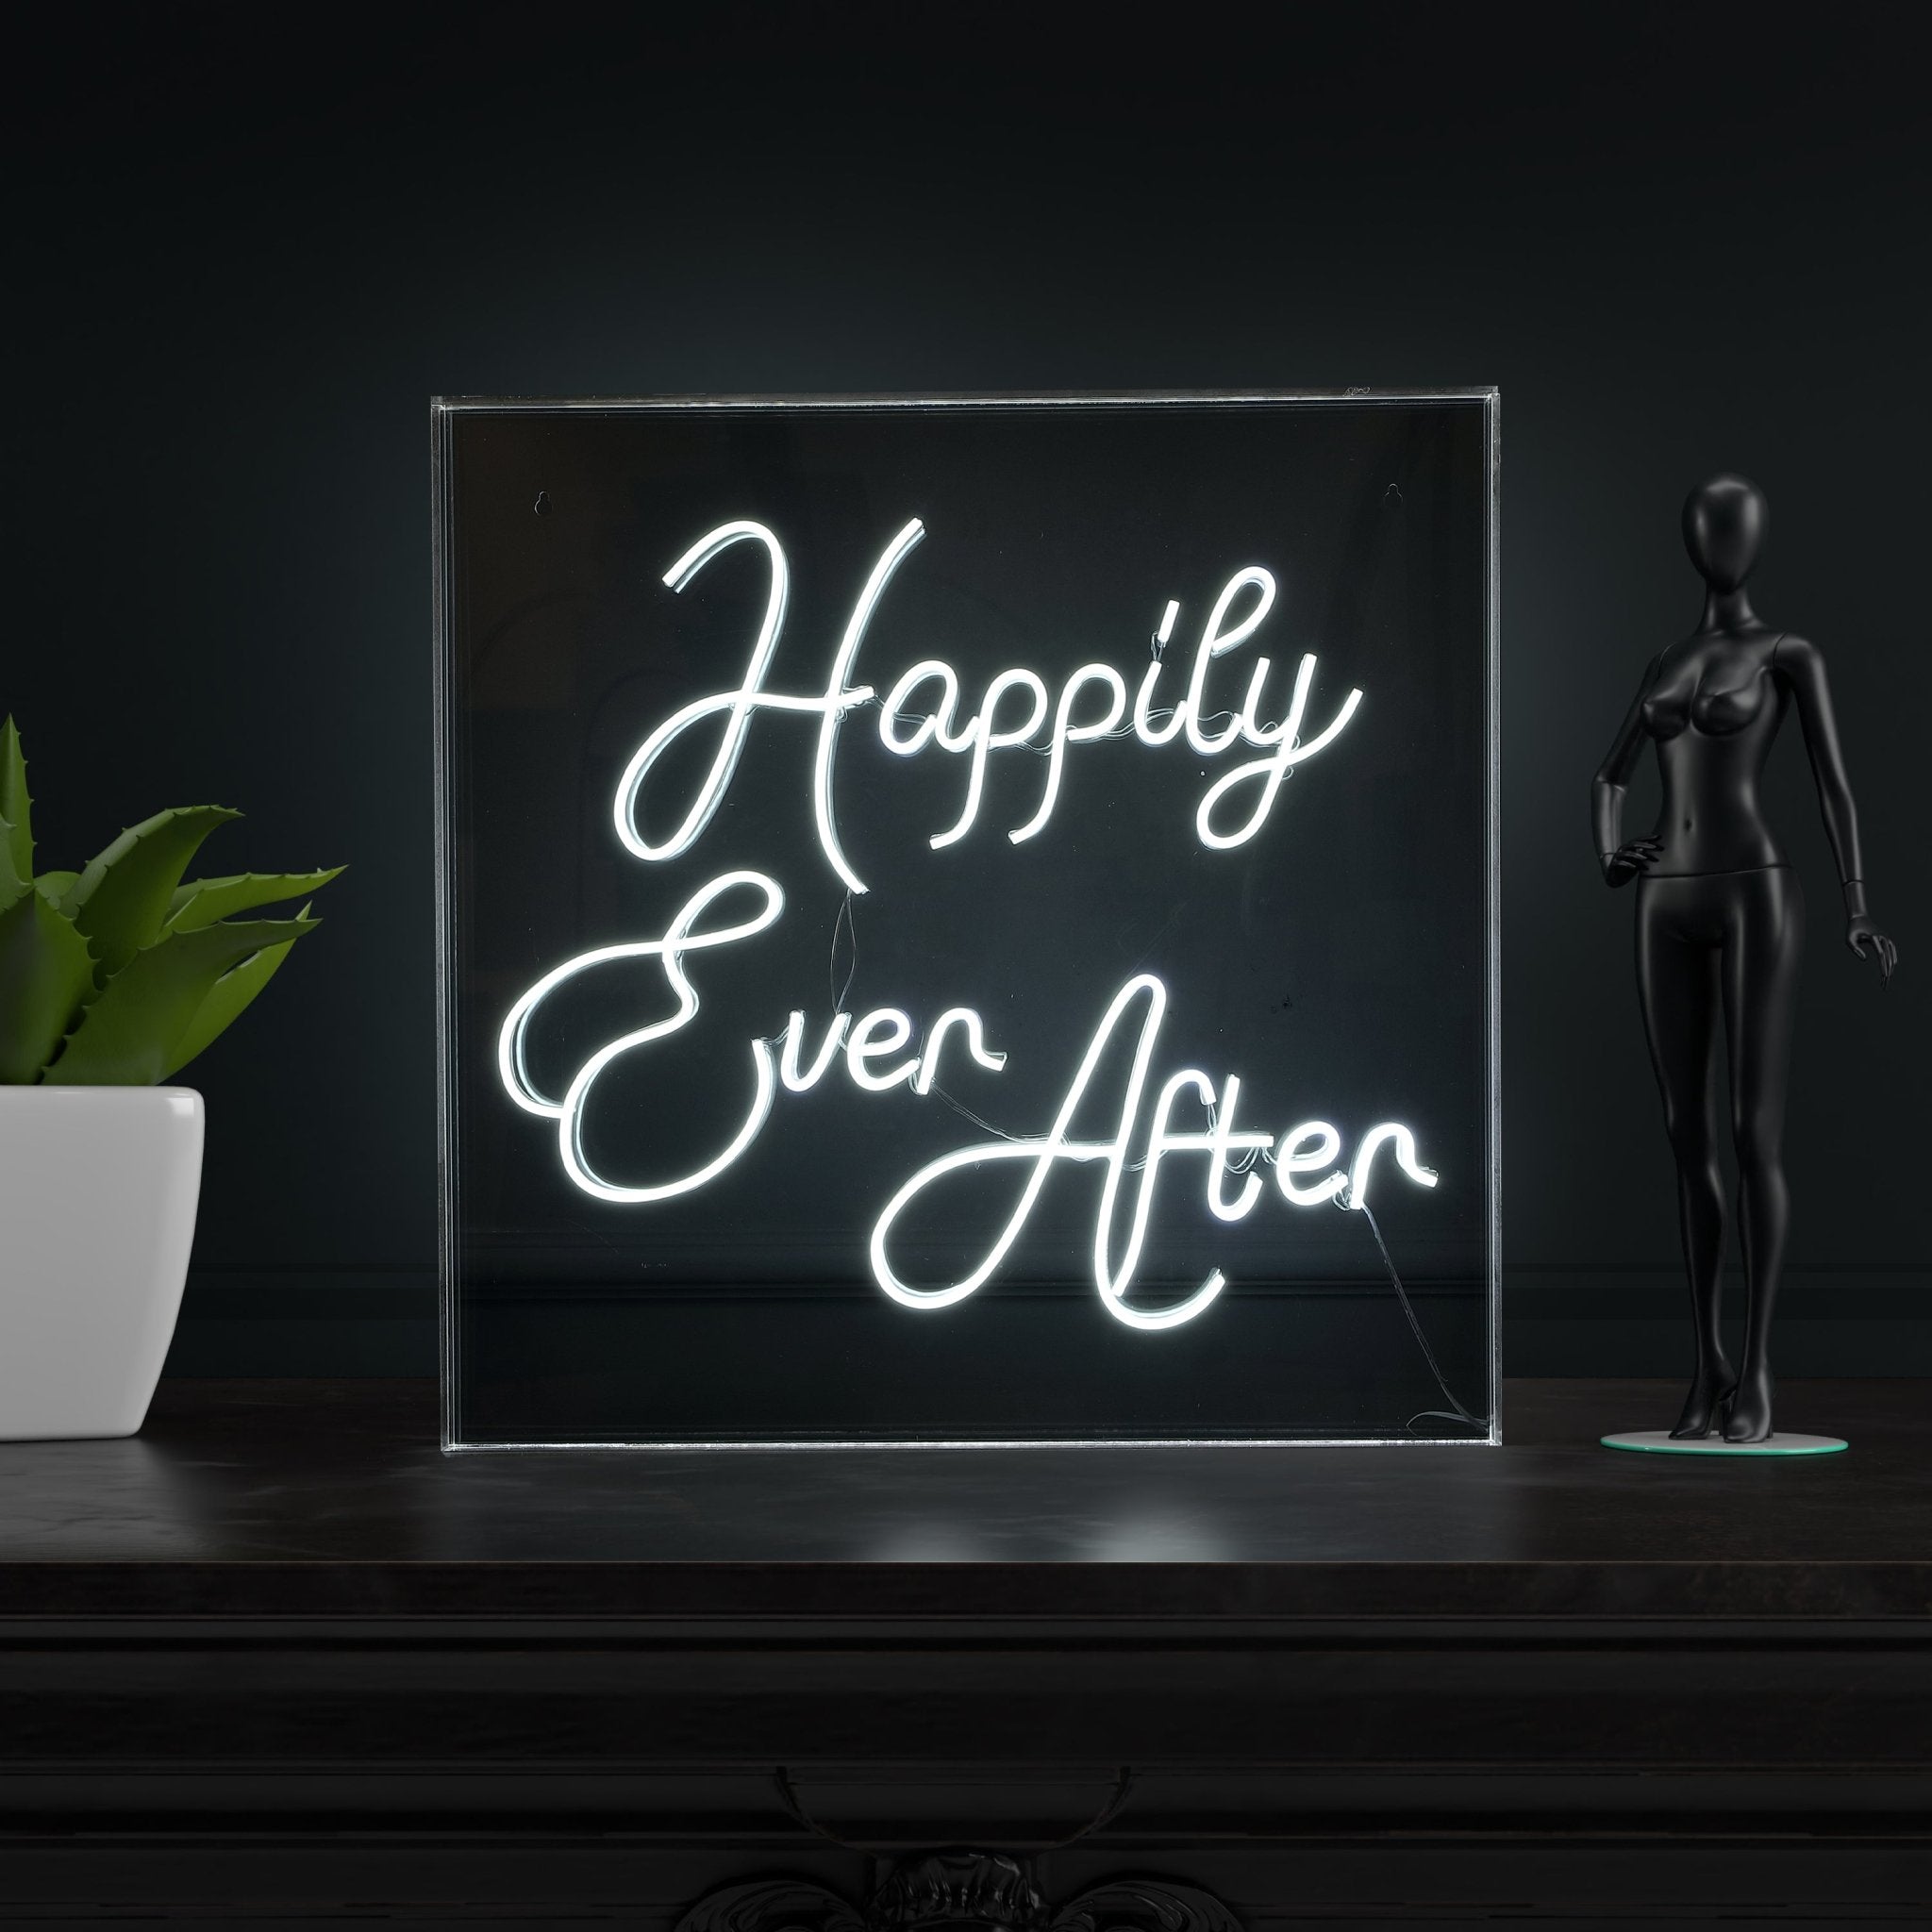 Happily Ever After Square Contemporary Glam Acrylic Box USB Operated LED Neon Light - Pier 1